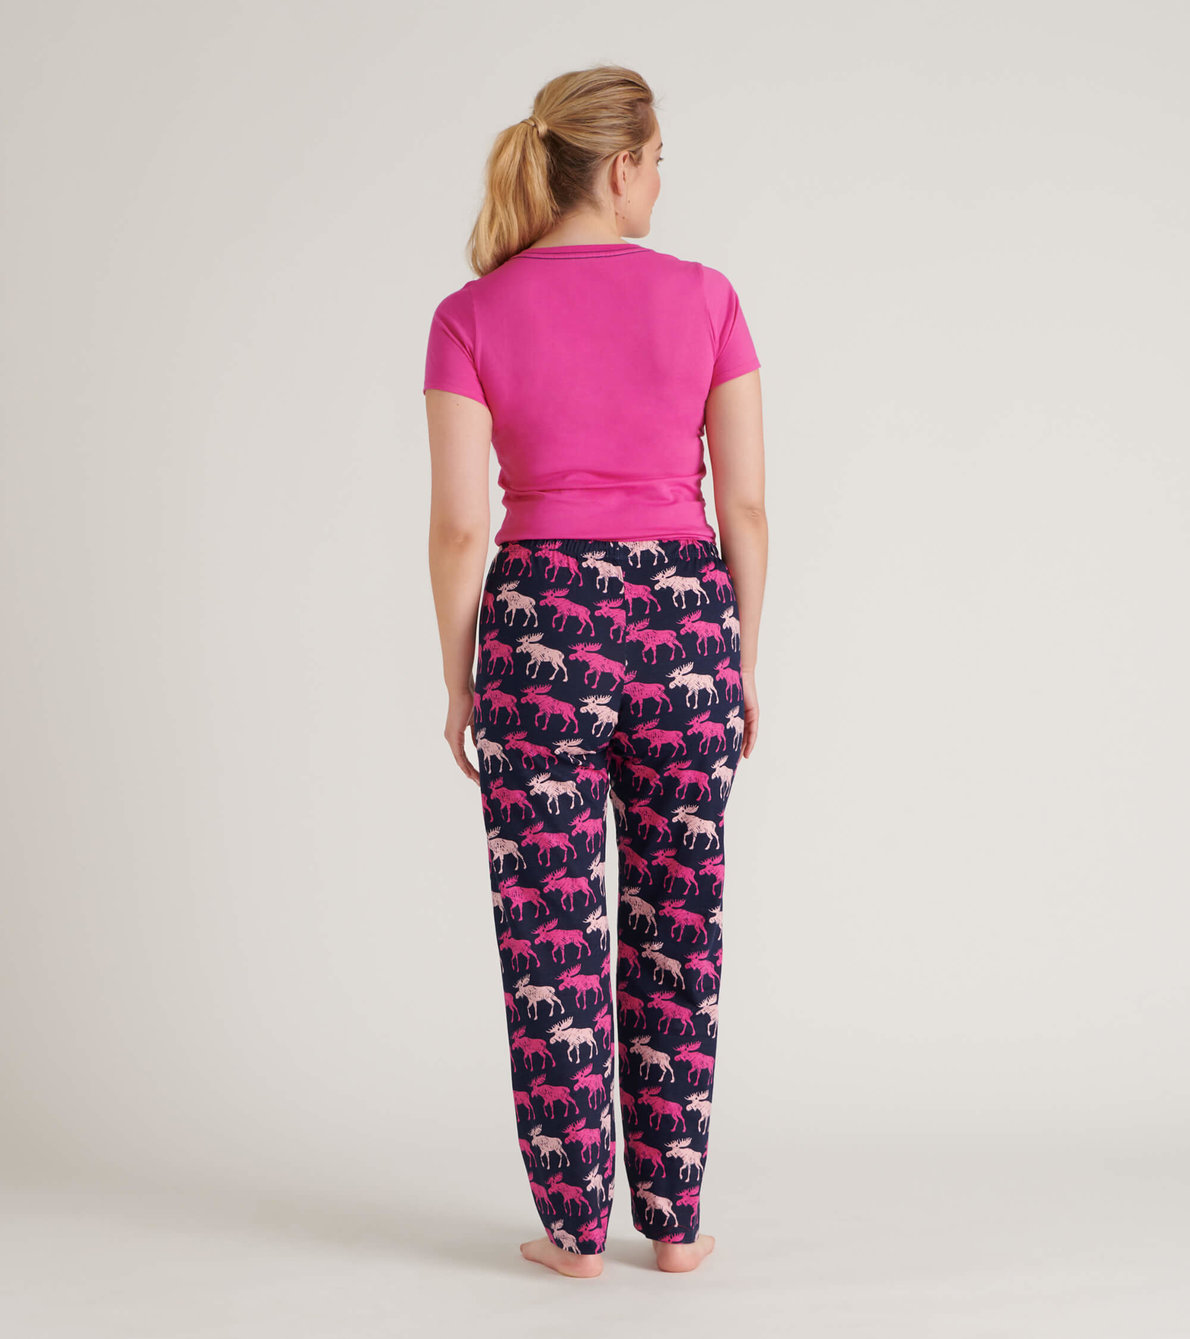 View larger image of Cottage Moose Women's Tee and Pants Pajama Separates